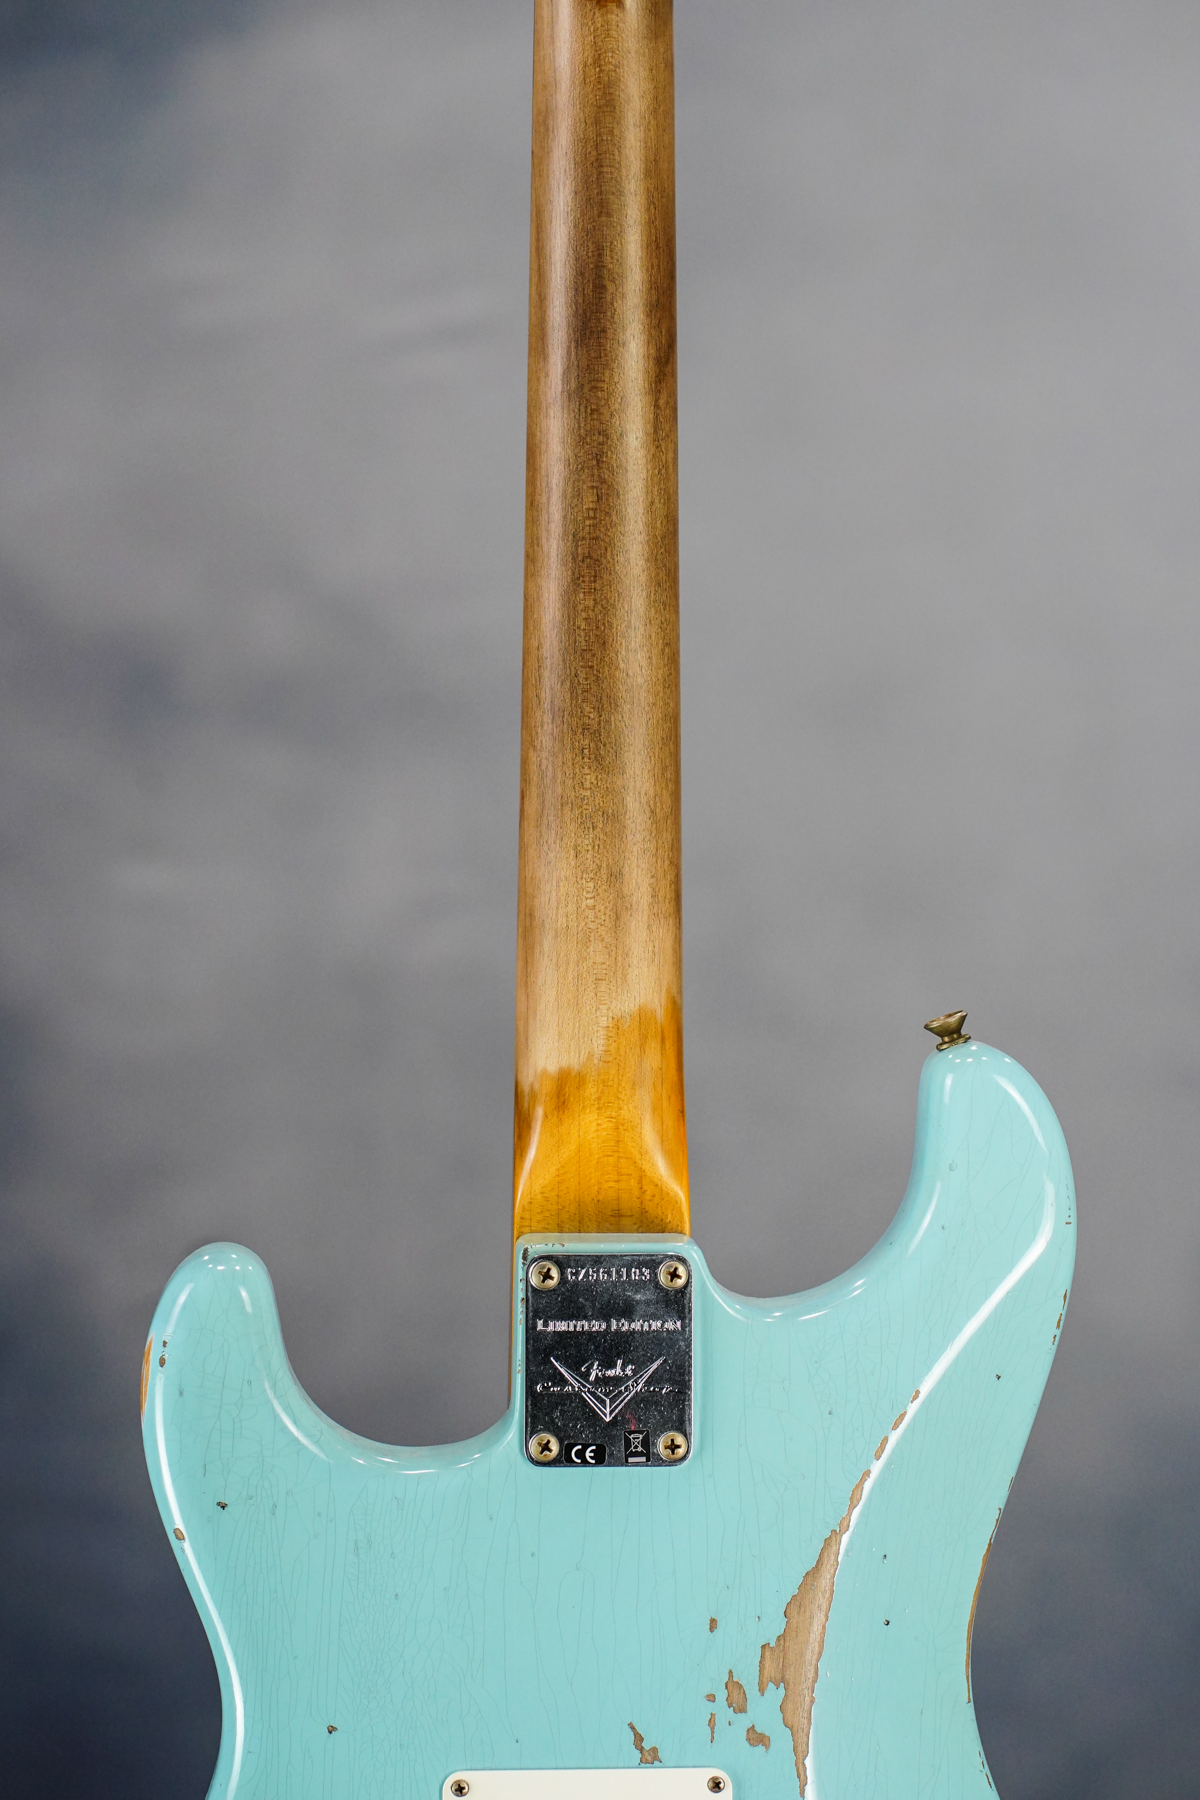 Custom Shop LE 1963 Stratocaster Hvy Relic Faded/aged Daphne Blue